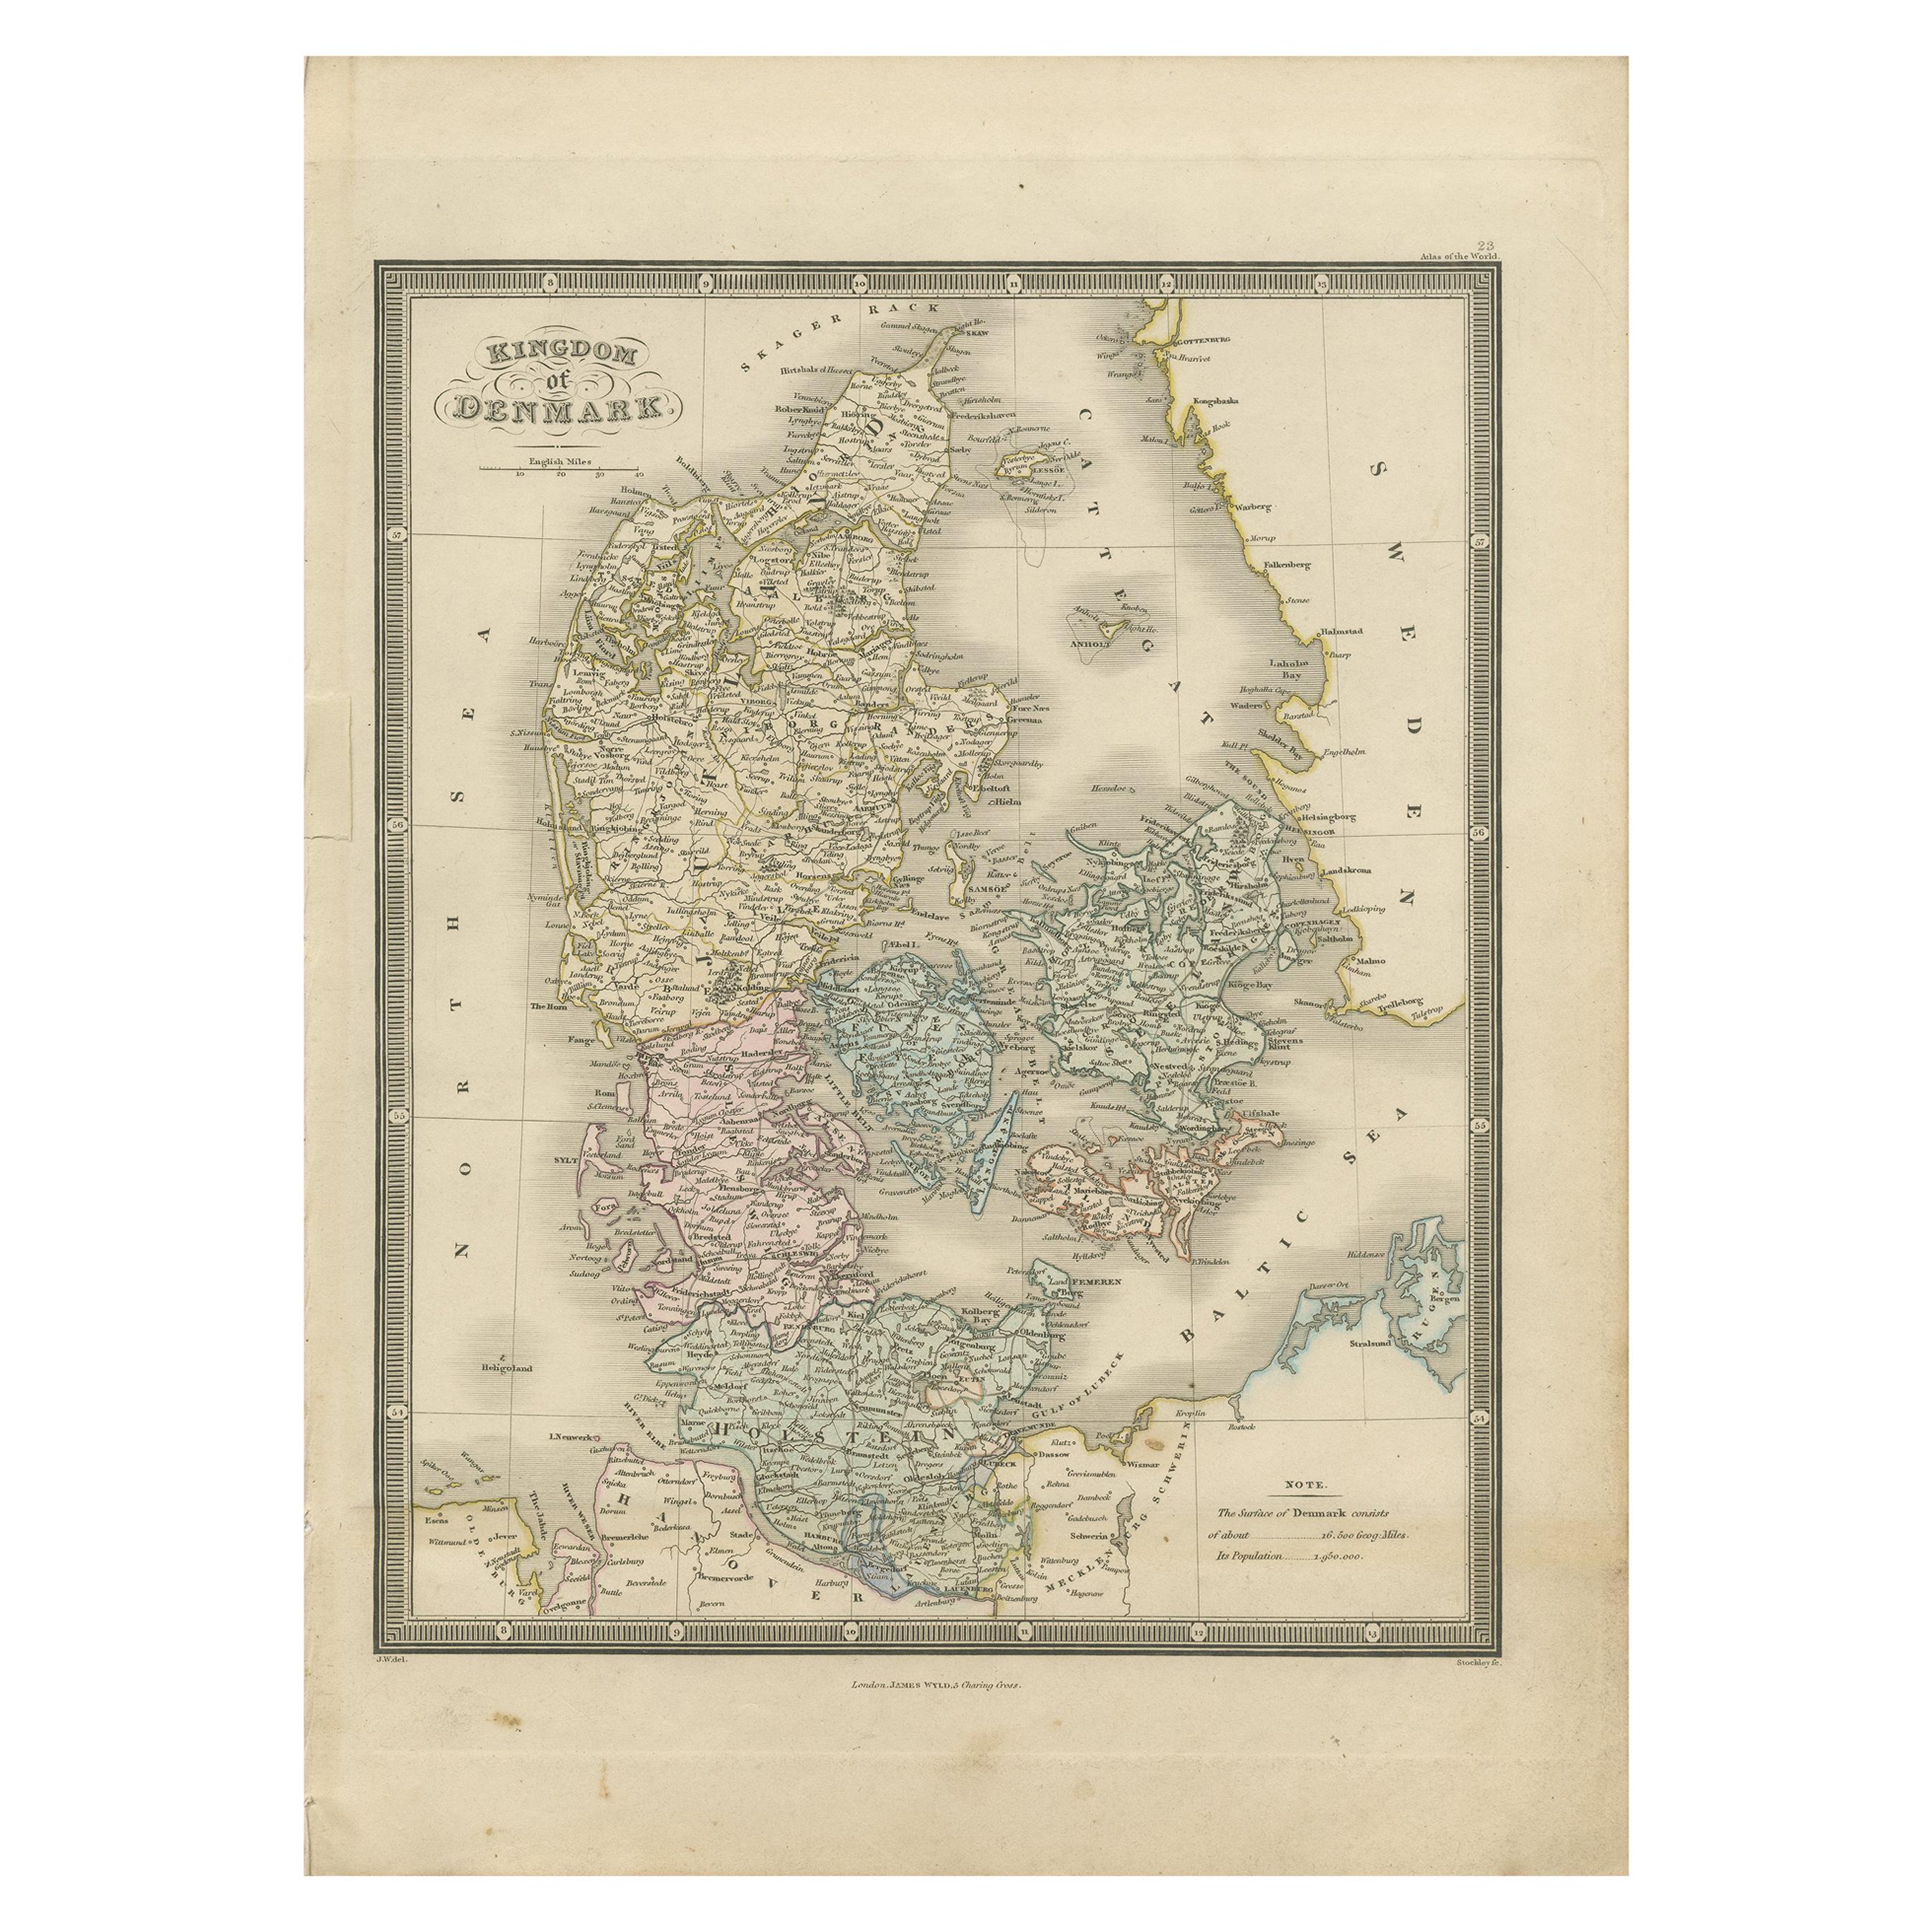 Antique Map of the Kingdom of Denmark by Wyld '1845'